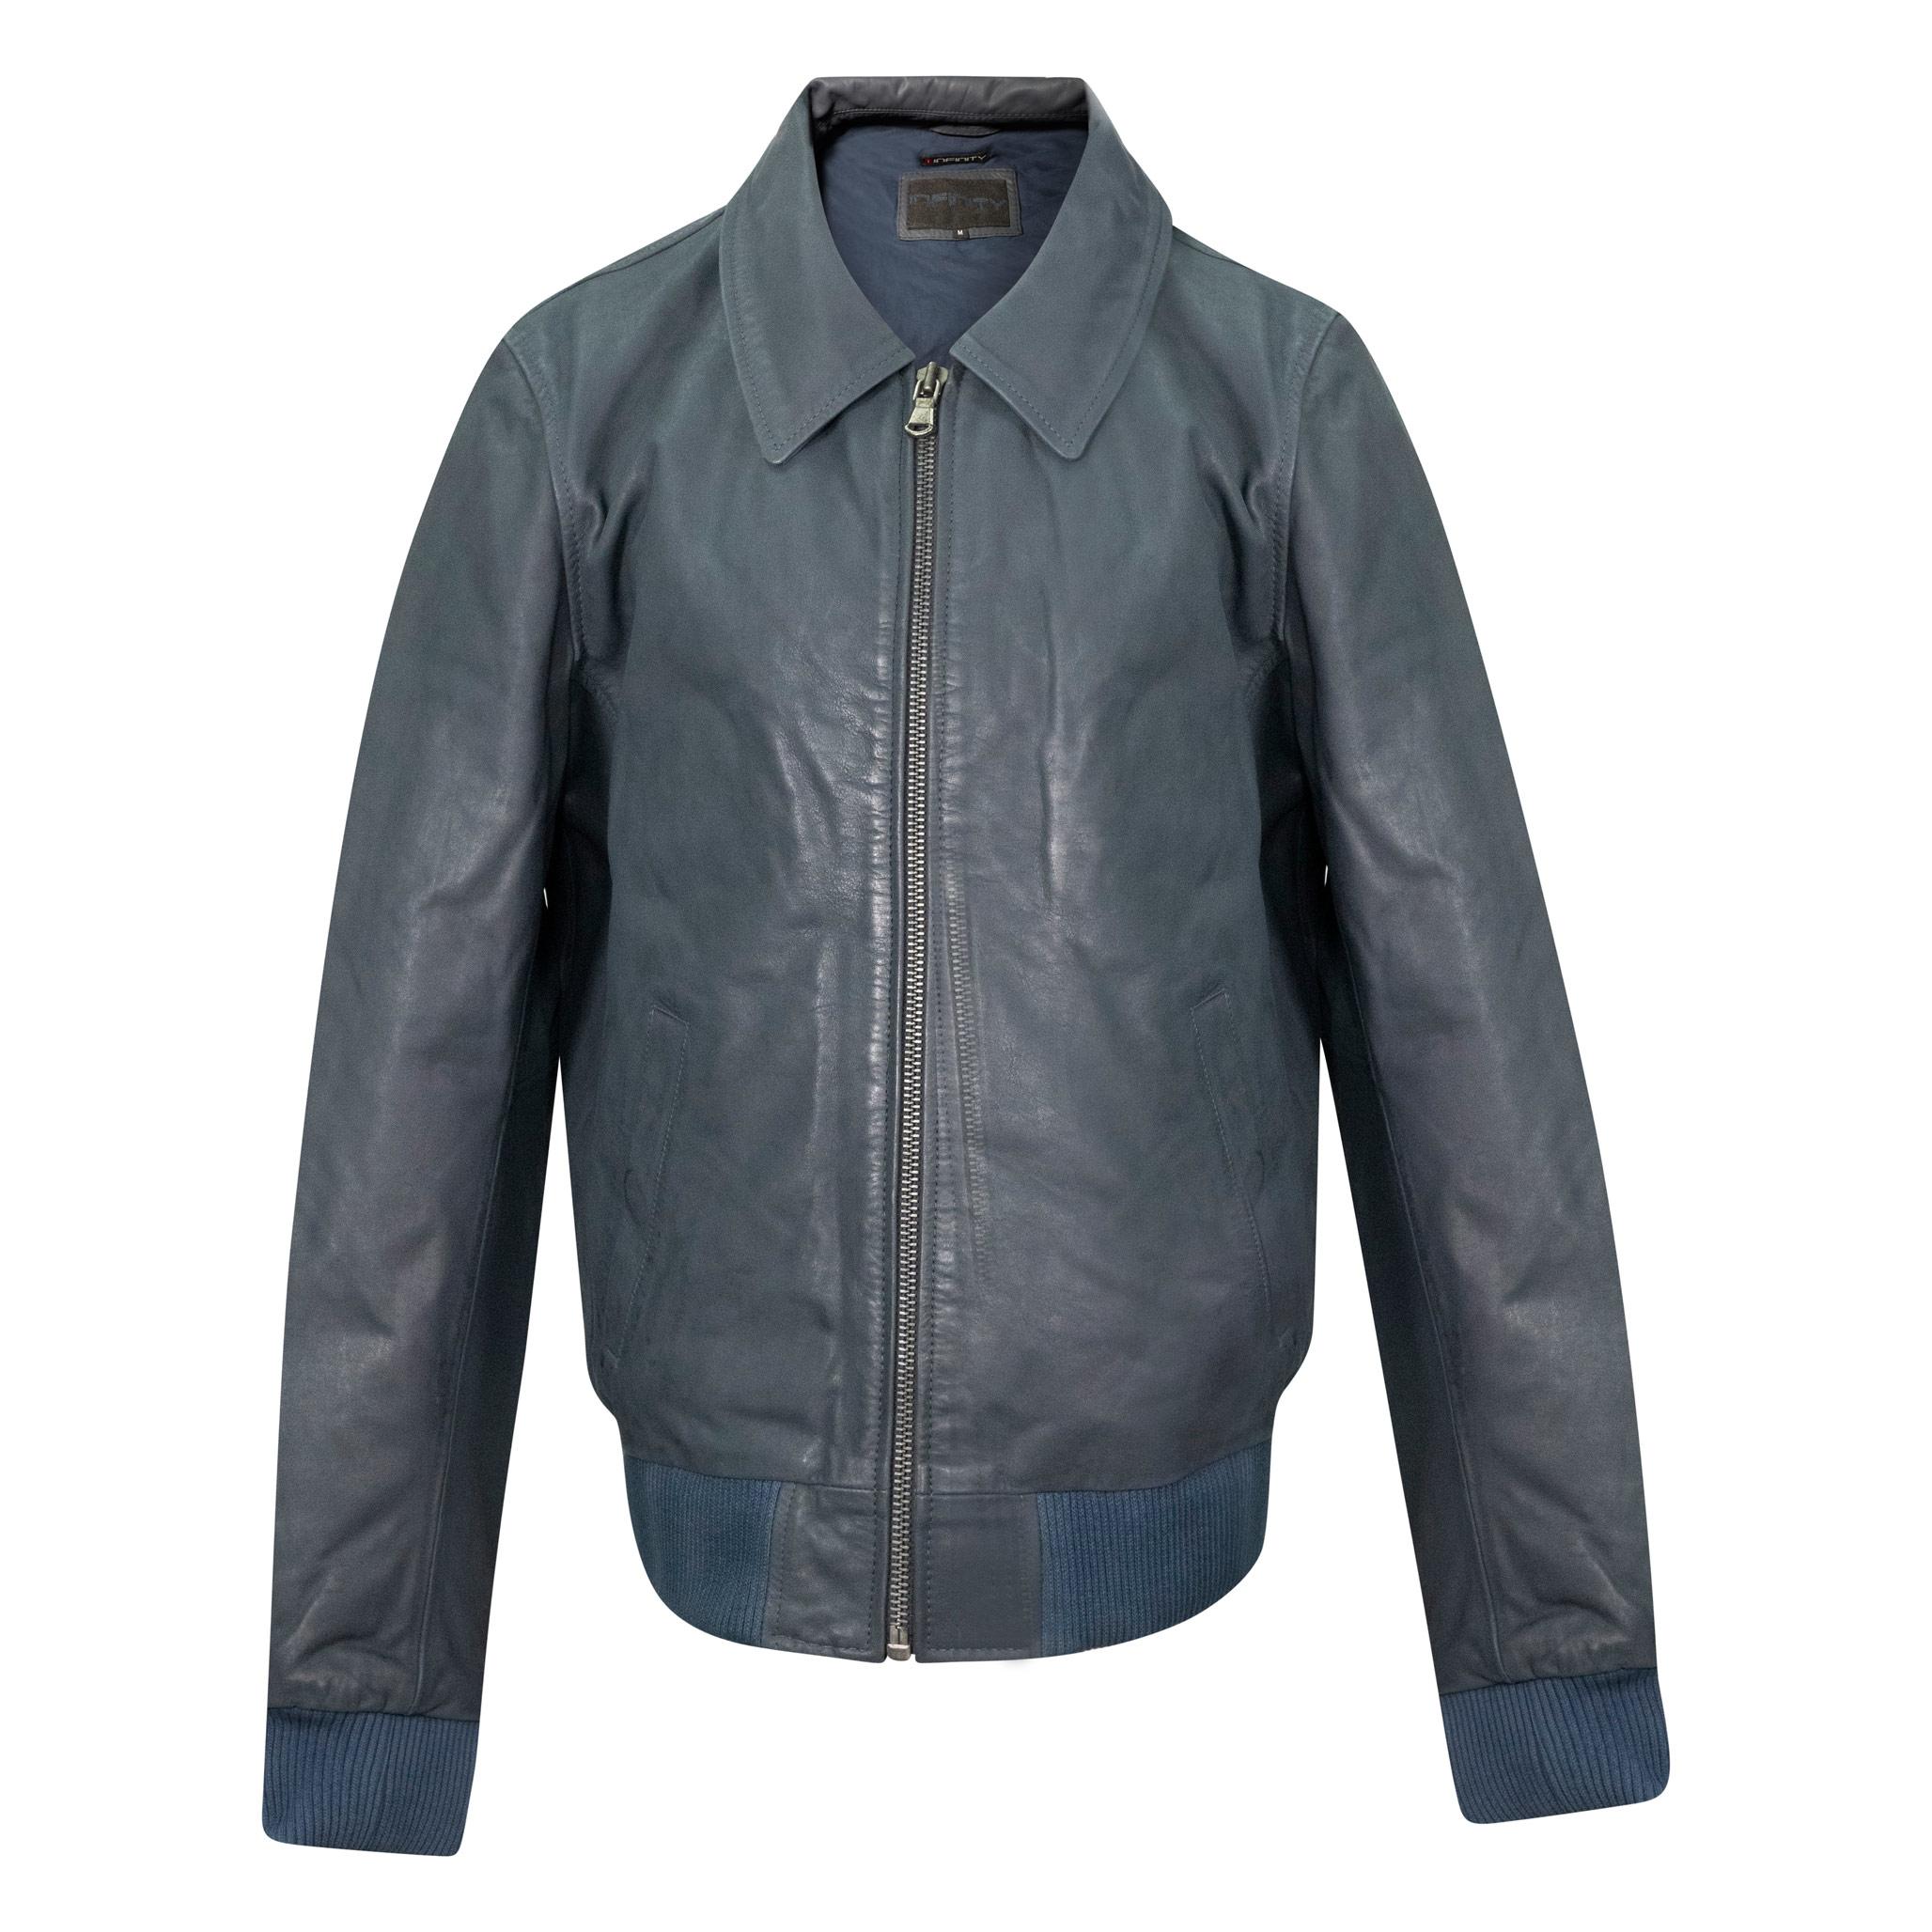 A short mens leather jacket in navy blue, with a ribbed hem, and cuff.